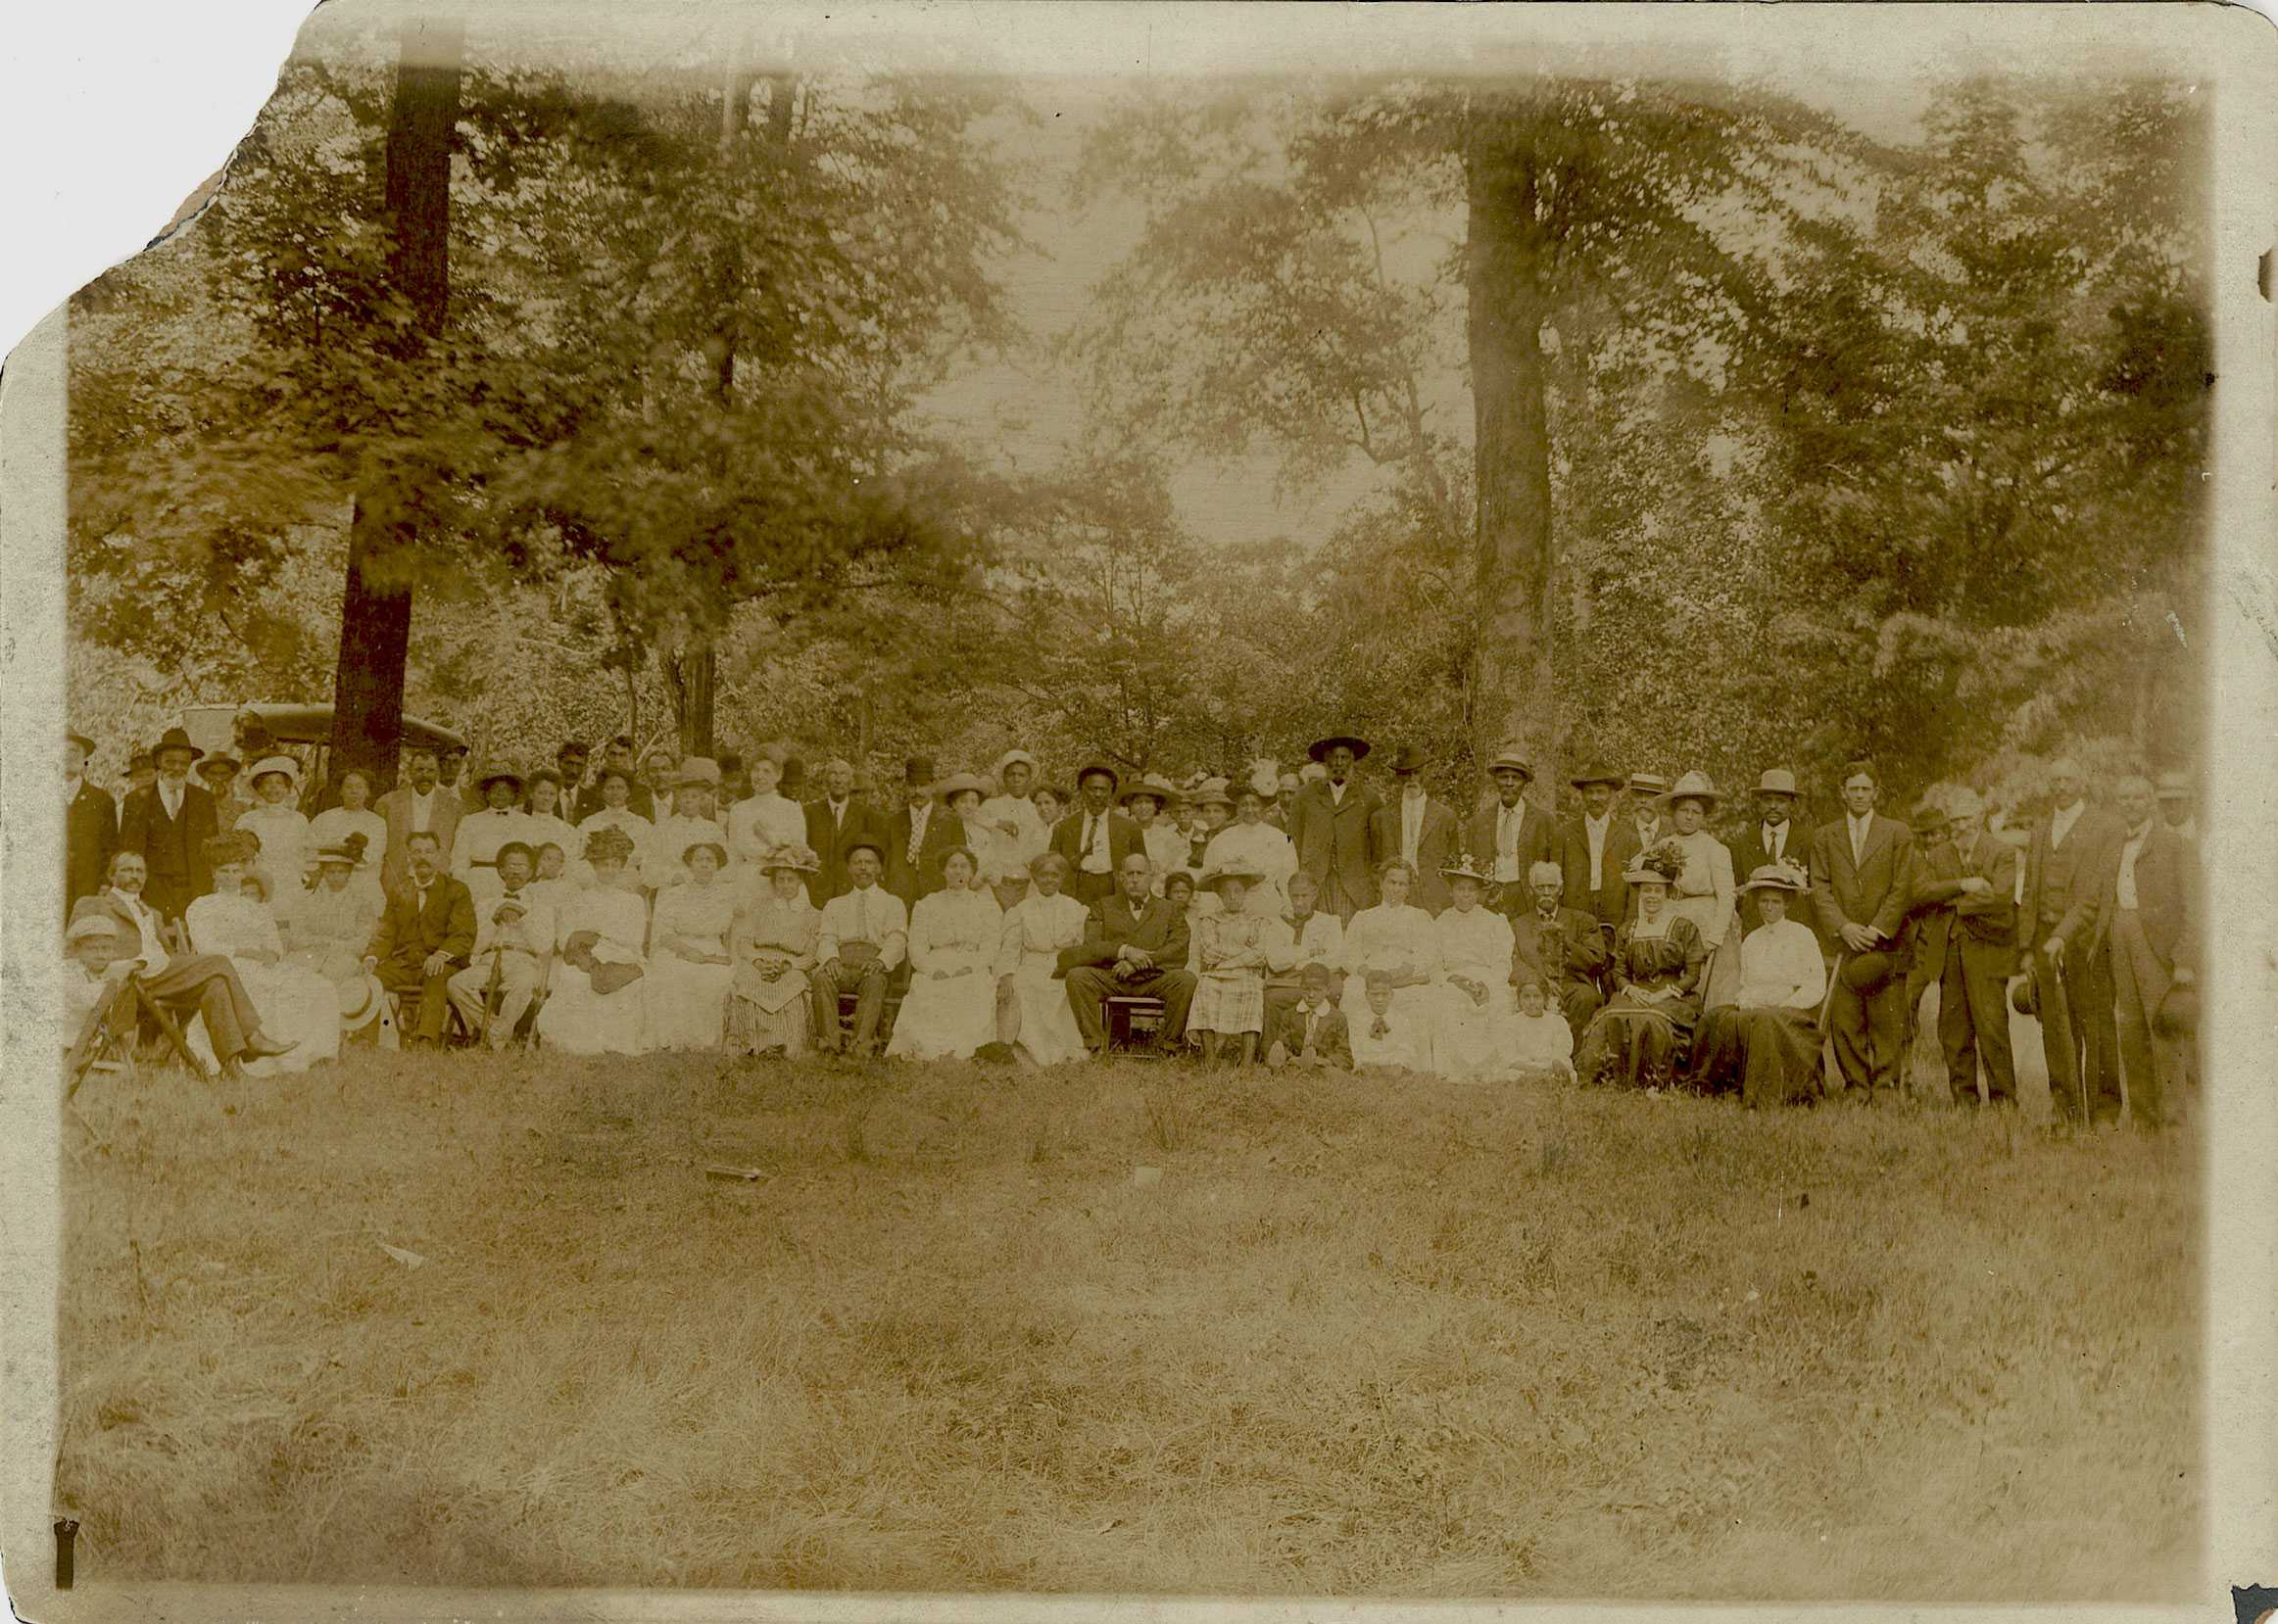 A sepia tone photograph of a family reunion. About 30 people are posed for the portrait in a wooden area.